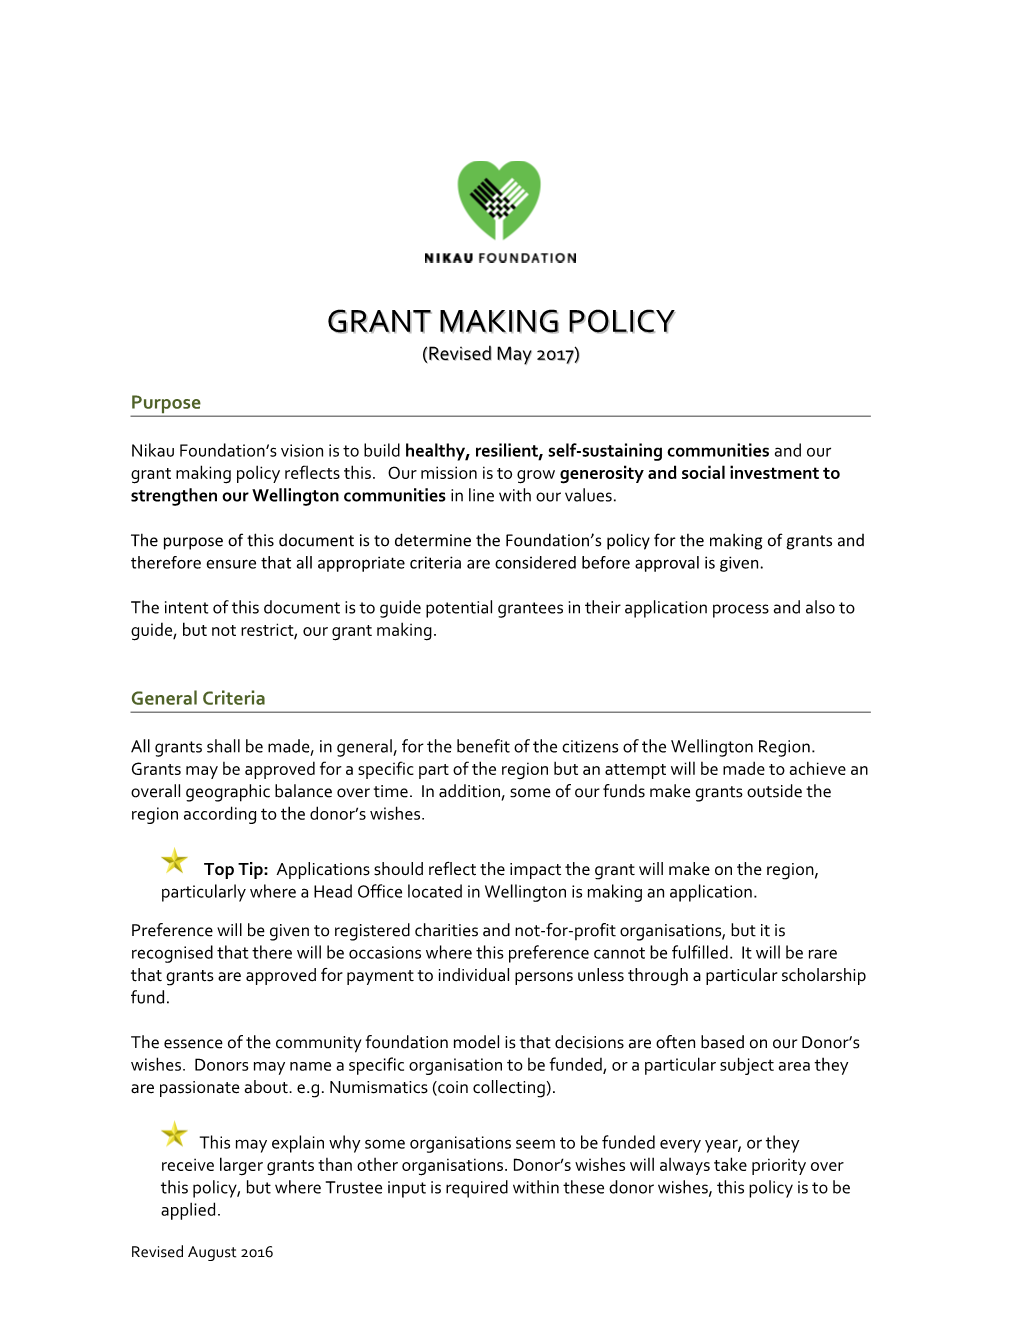 Grant Making Strategy and Policy